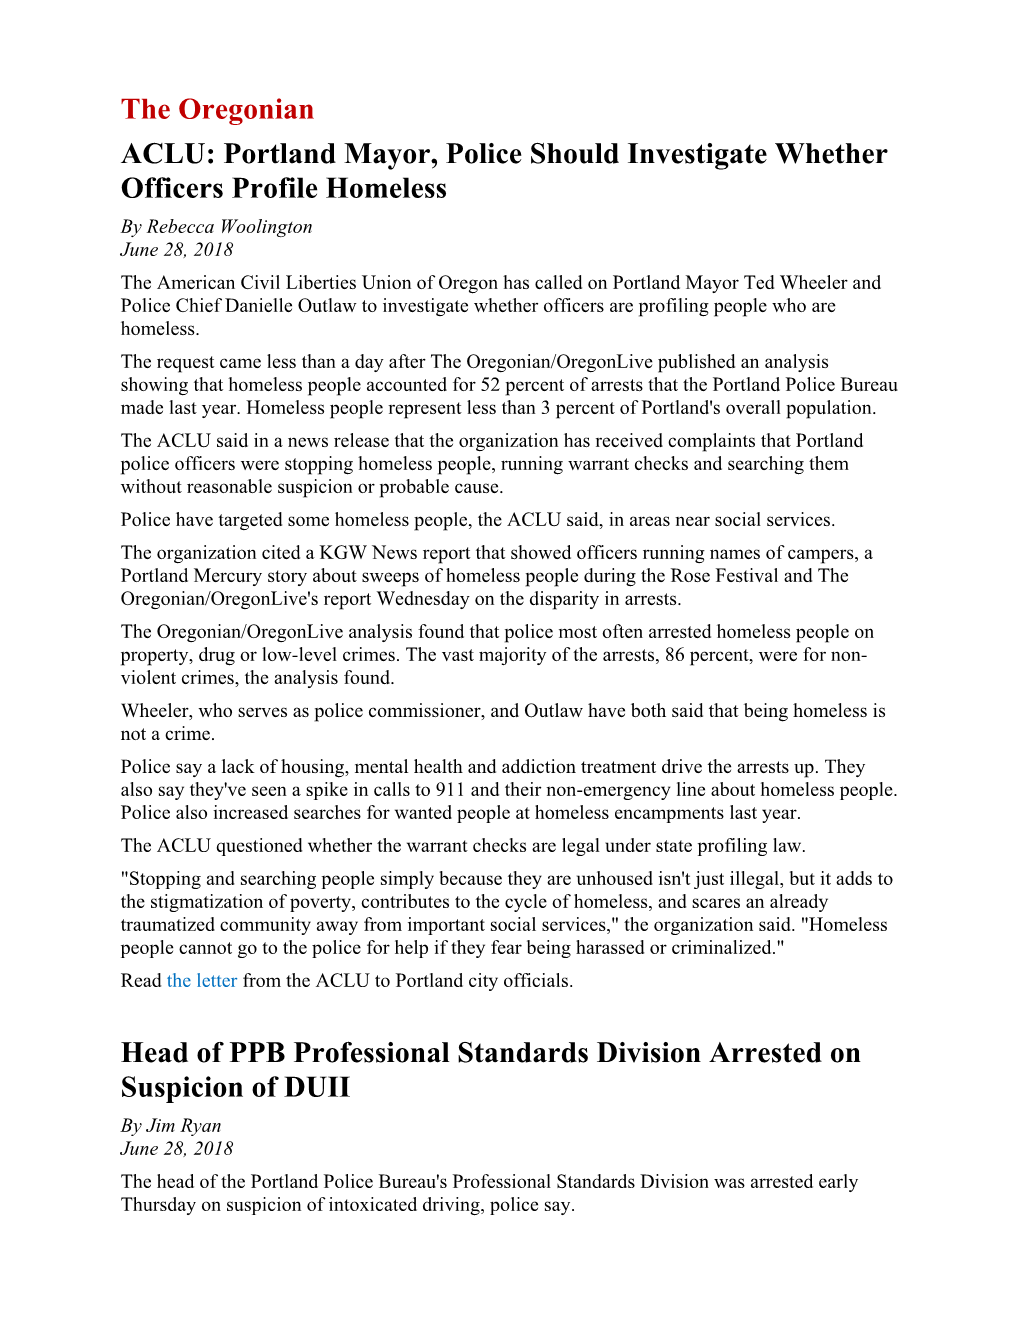 Portland Mayor, Police Should Investigate Whether Officers Profile Homeless Head of PPB Professional Standar